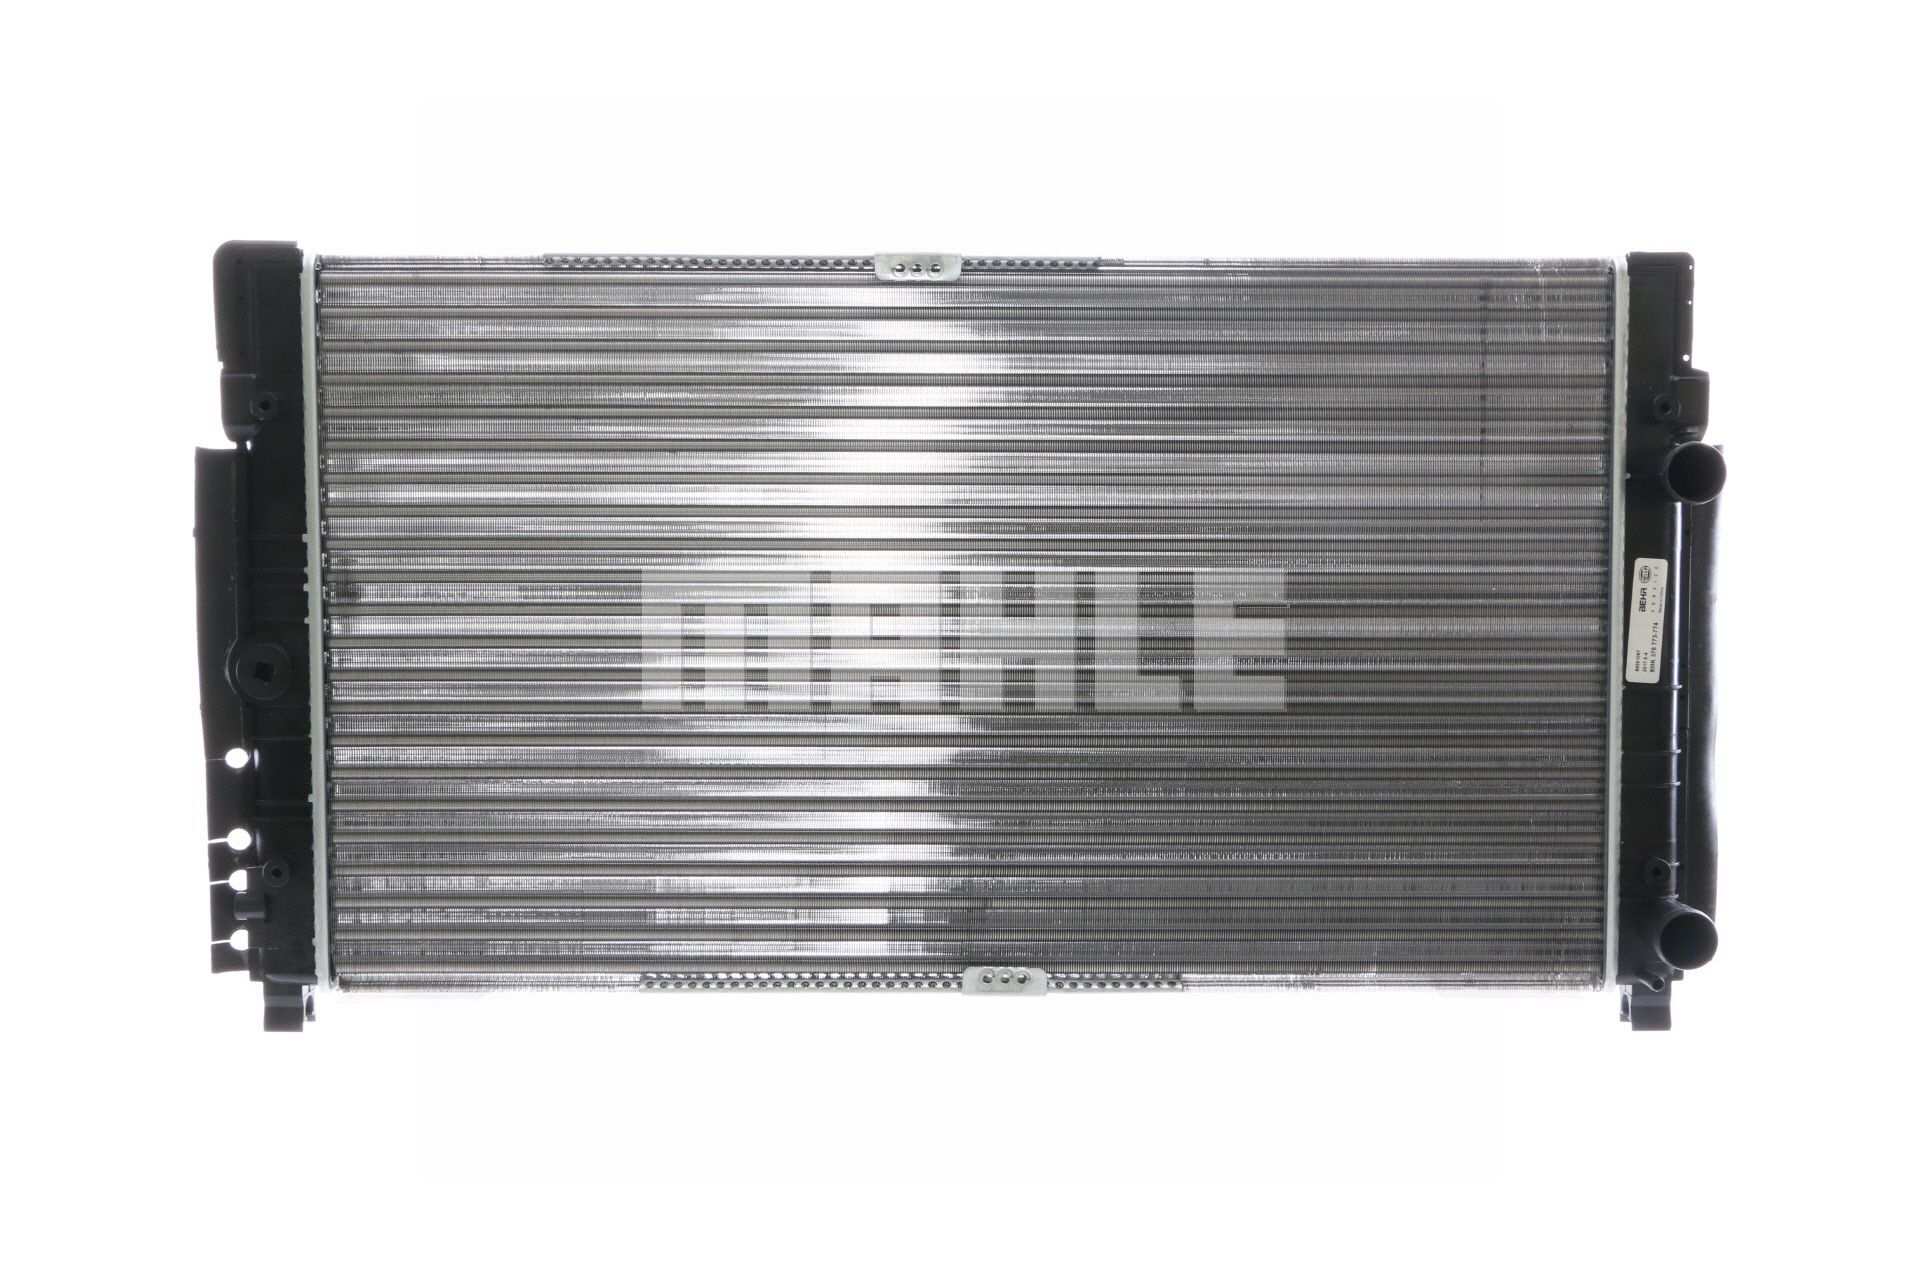 MAHLE ORIGINAL CR 1533 000S Engine radiator for vehicles with long driver cab, 720 x 414 x 34 mm, Mechanically jointed cooling fins